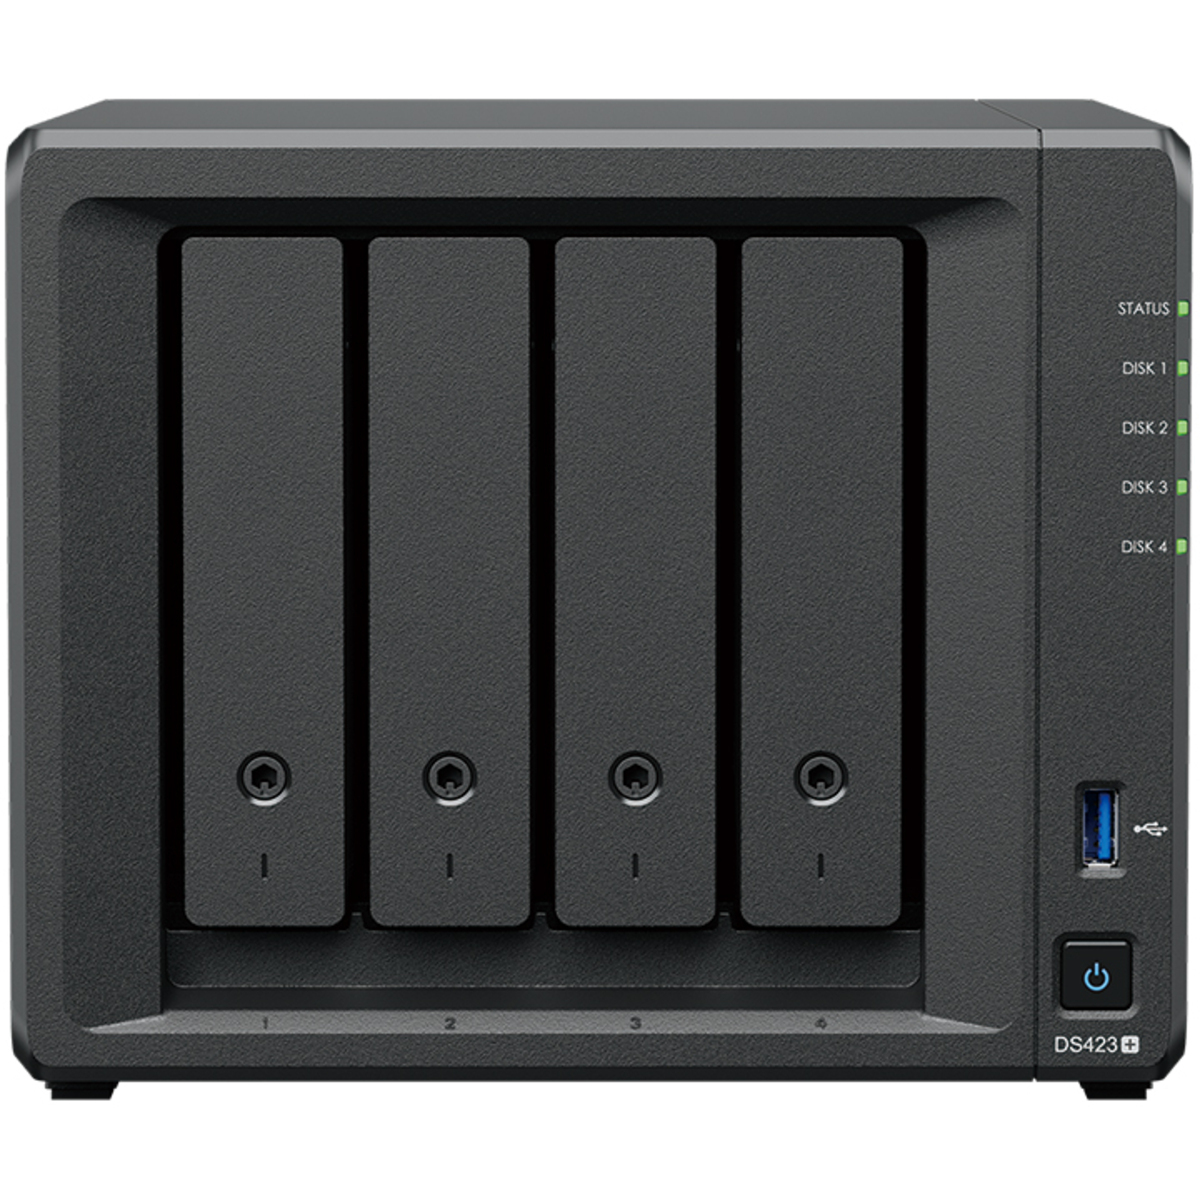 Synology DS423+ NAS - Network Attached Storage Device Burn-In Tested Configurations - FREE RAM UPGRADE